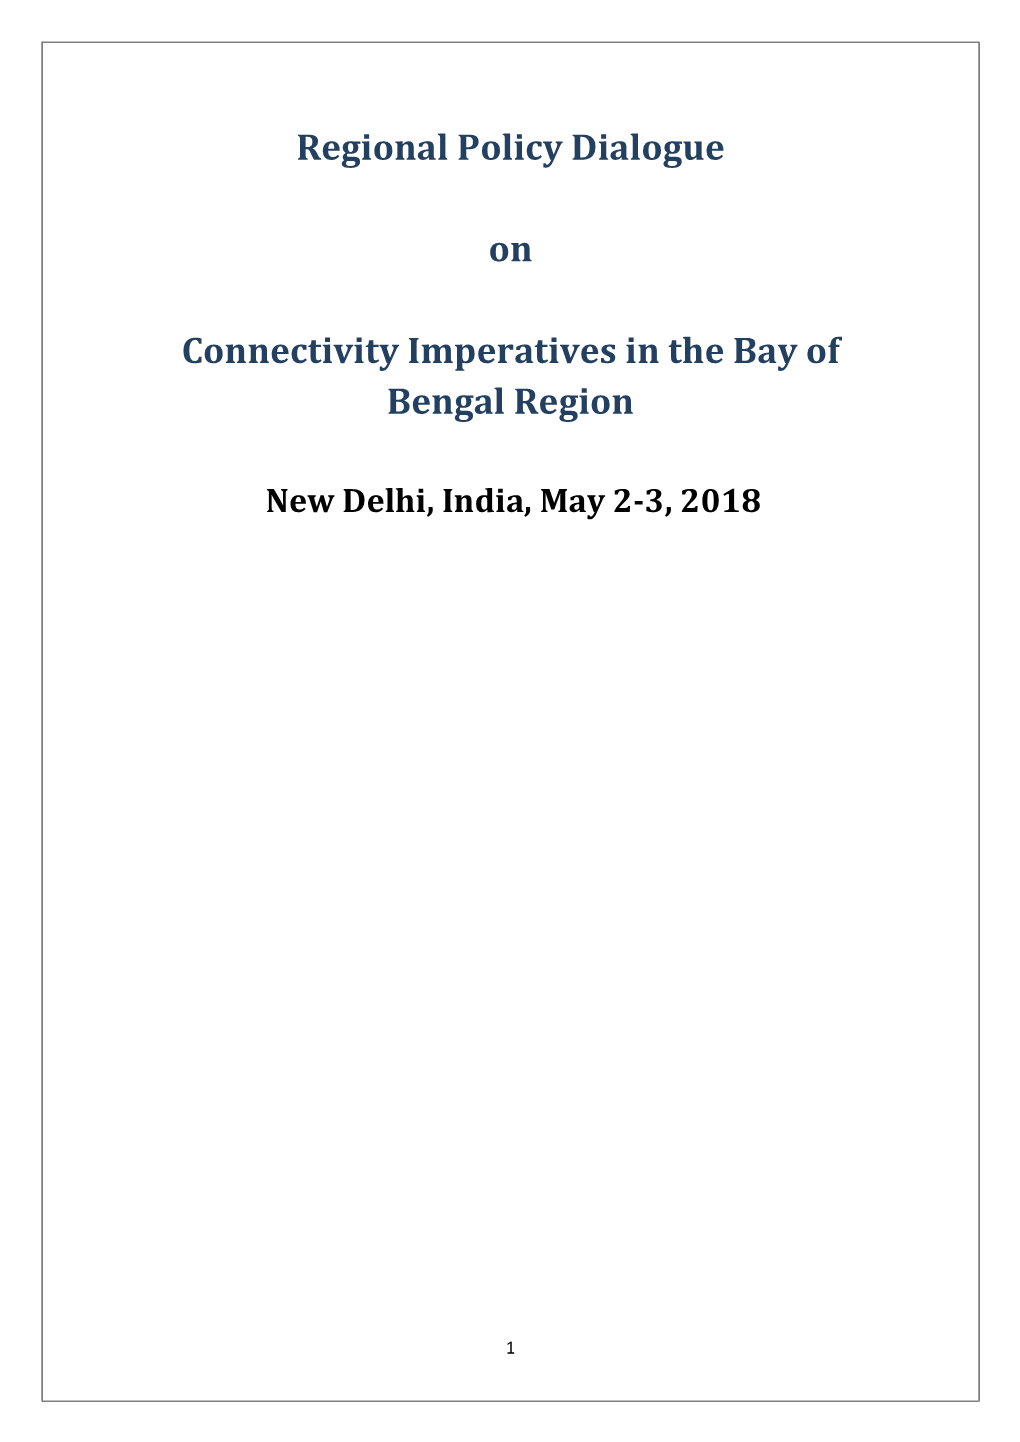 Regional Policy Dialogue on Connectivity Imperatives in the Bay of Bengal Region